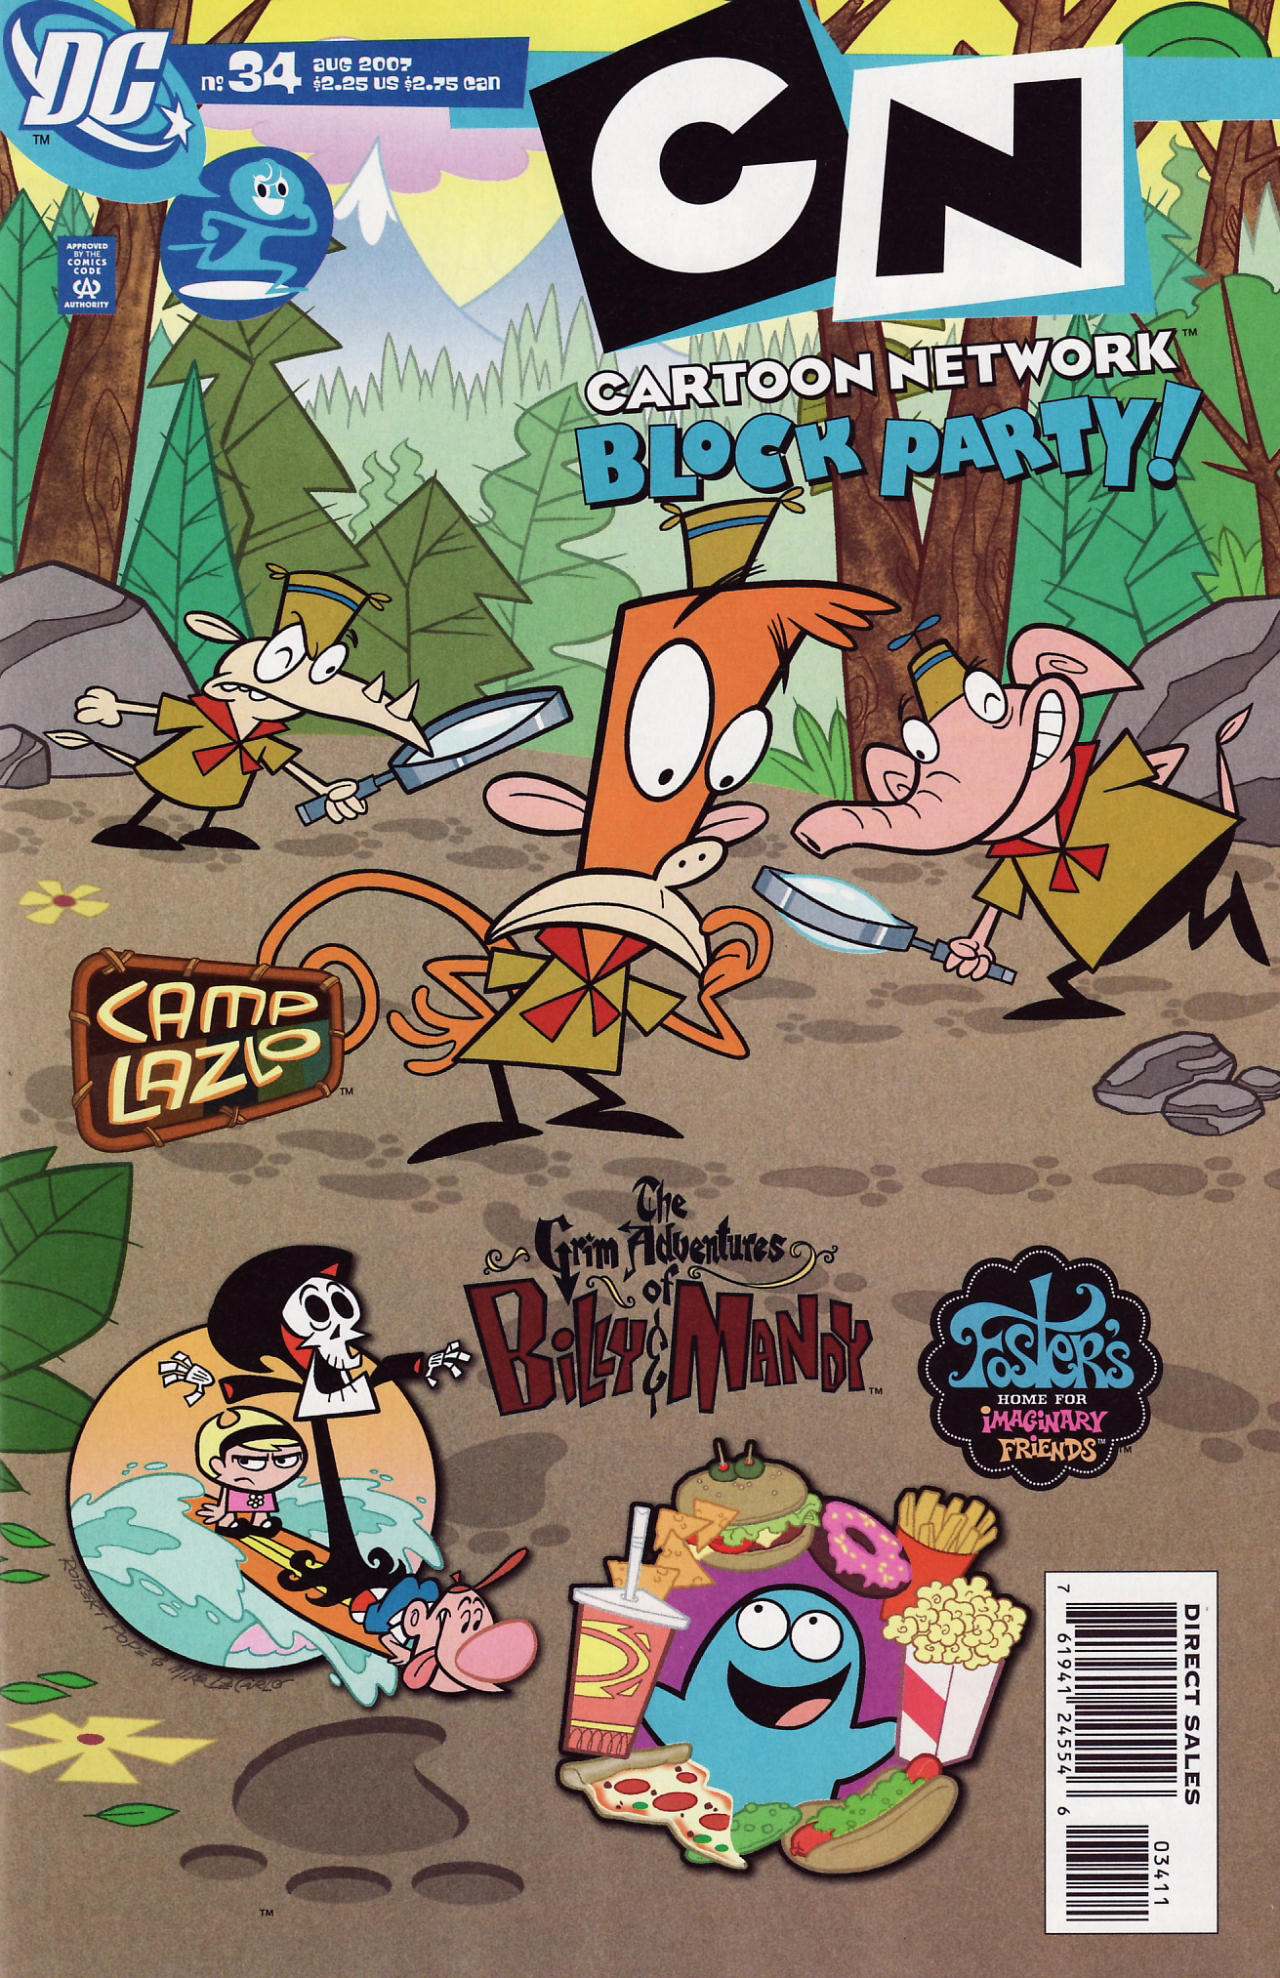 Read online Cartoon Network Block Party comic -  Issue #34 - 1